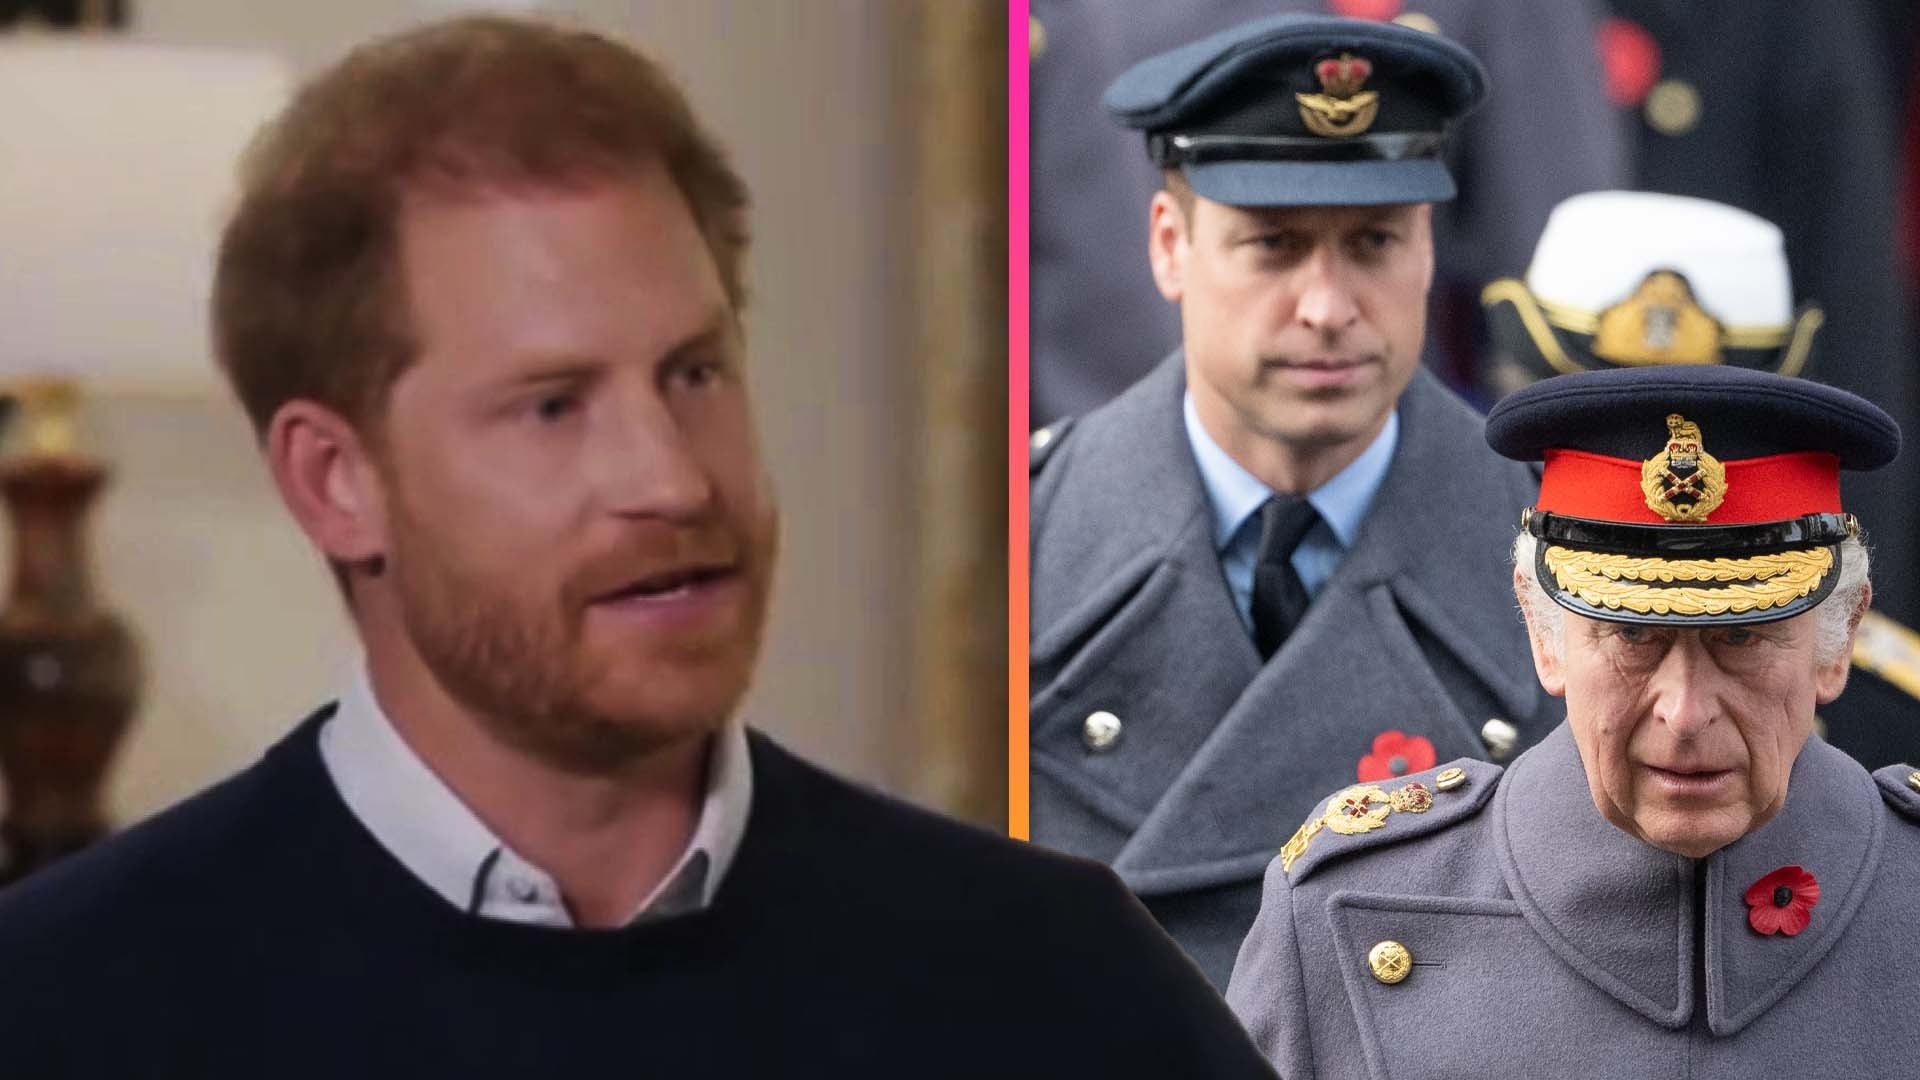 Prince Harry Says His Brother and Father Won't Reconcile With Him